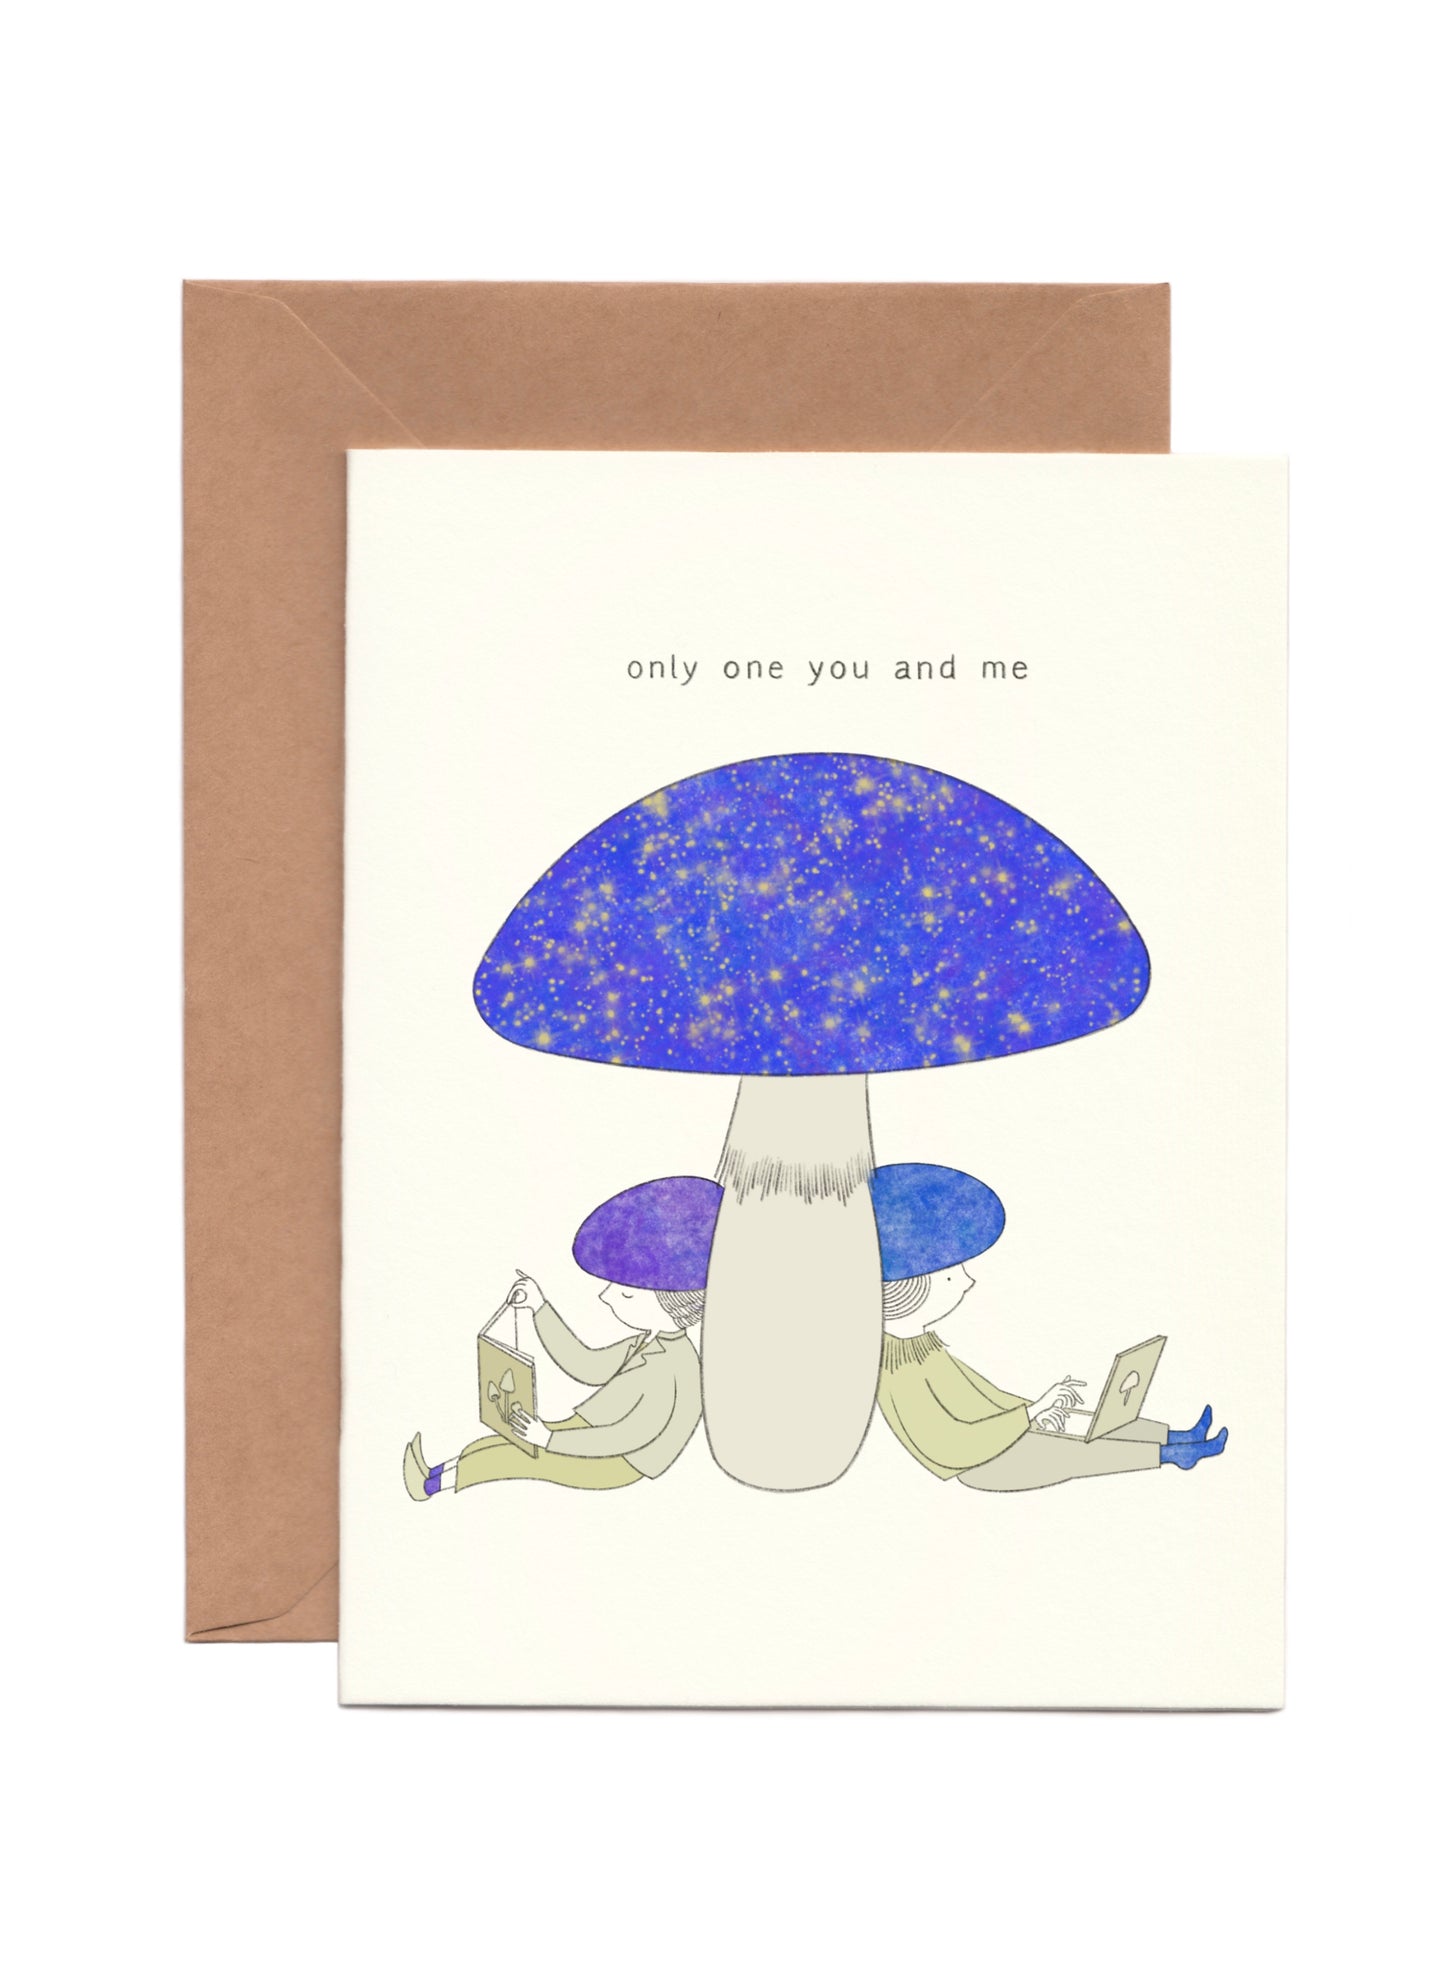 Dreamy just because card with two mushroom people reading a book and working on a computer together under a starry universe